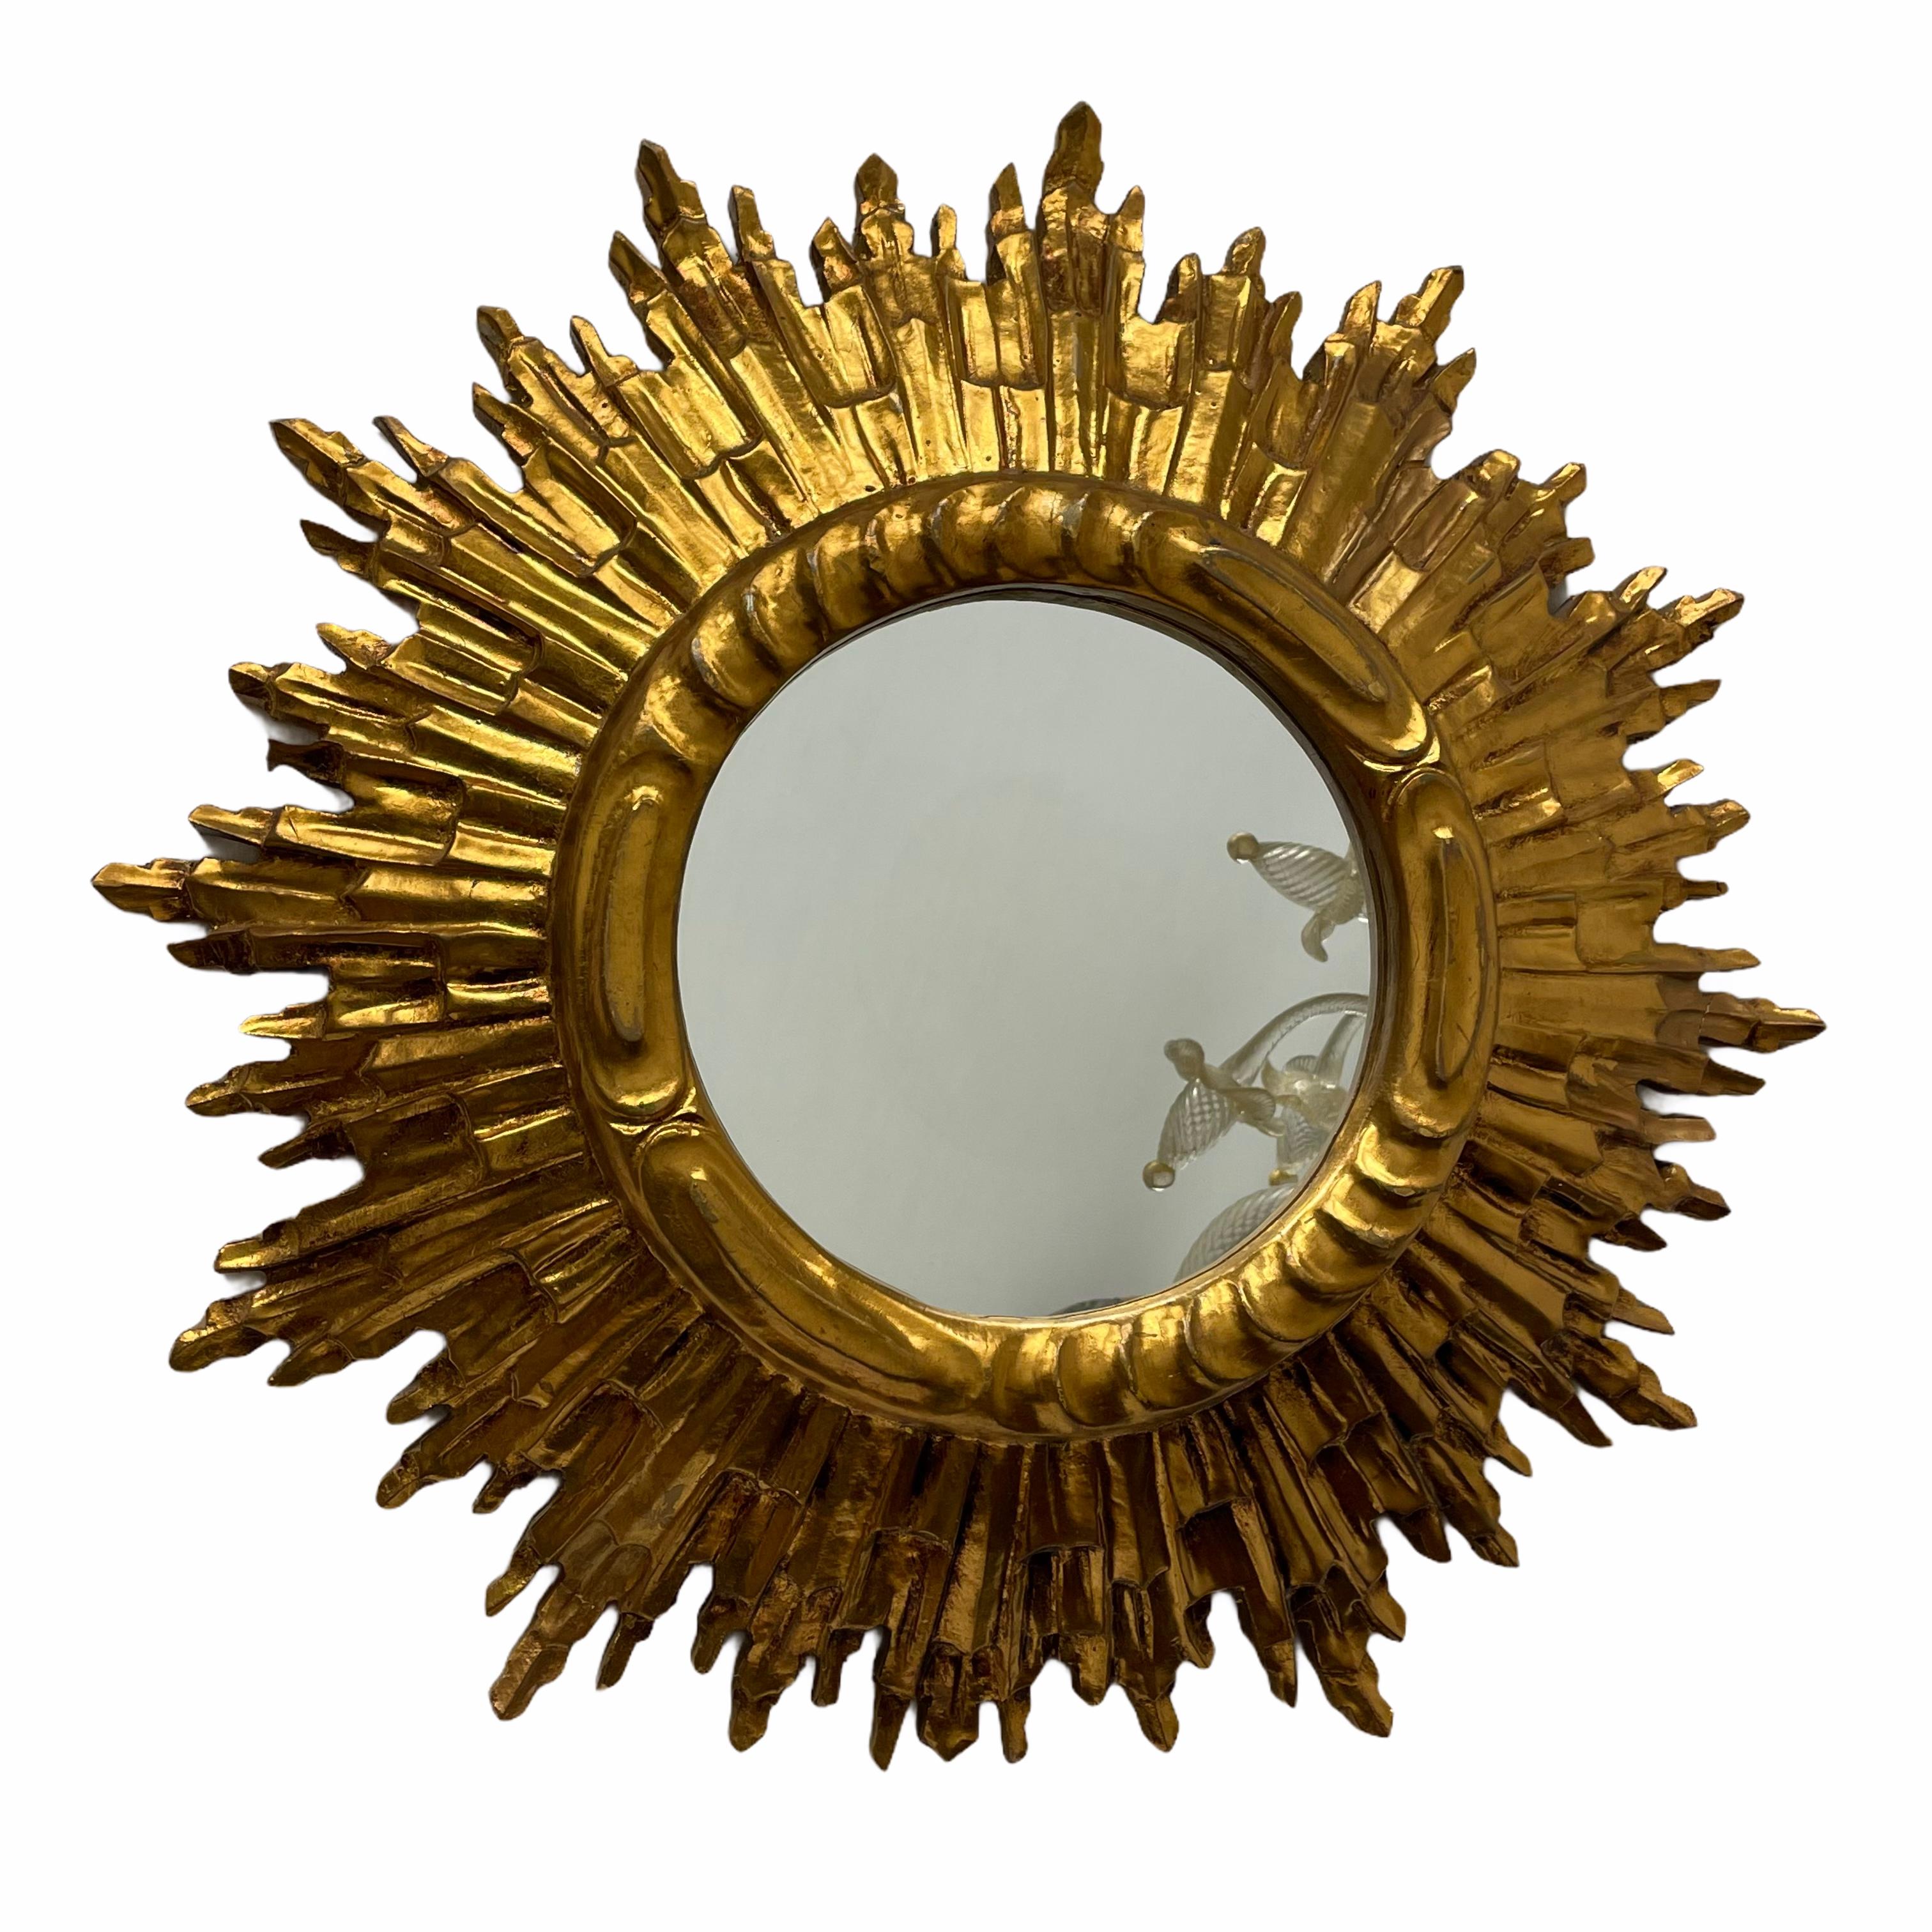 A gorgeous sunburst or starburst mirror. Made of gilded wood. It measures approximate: 23.63